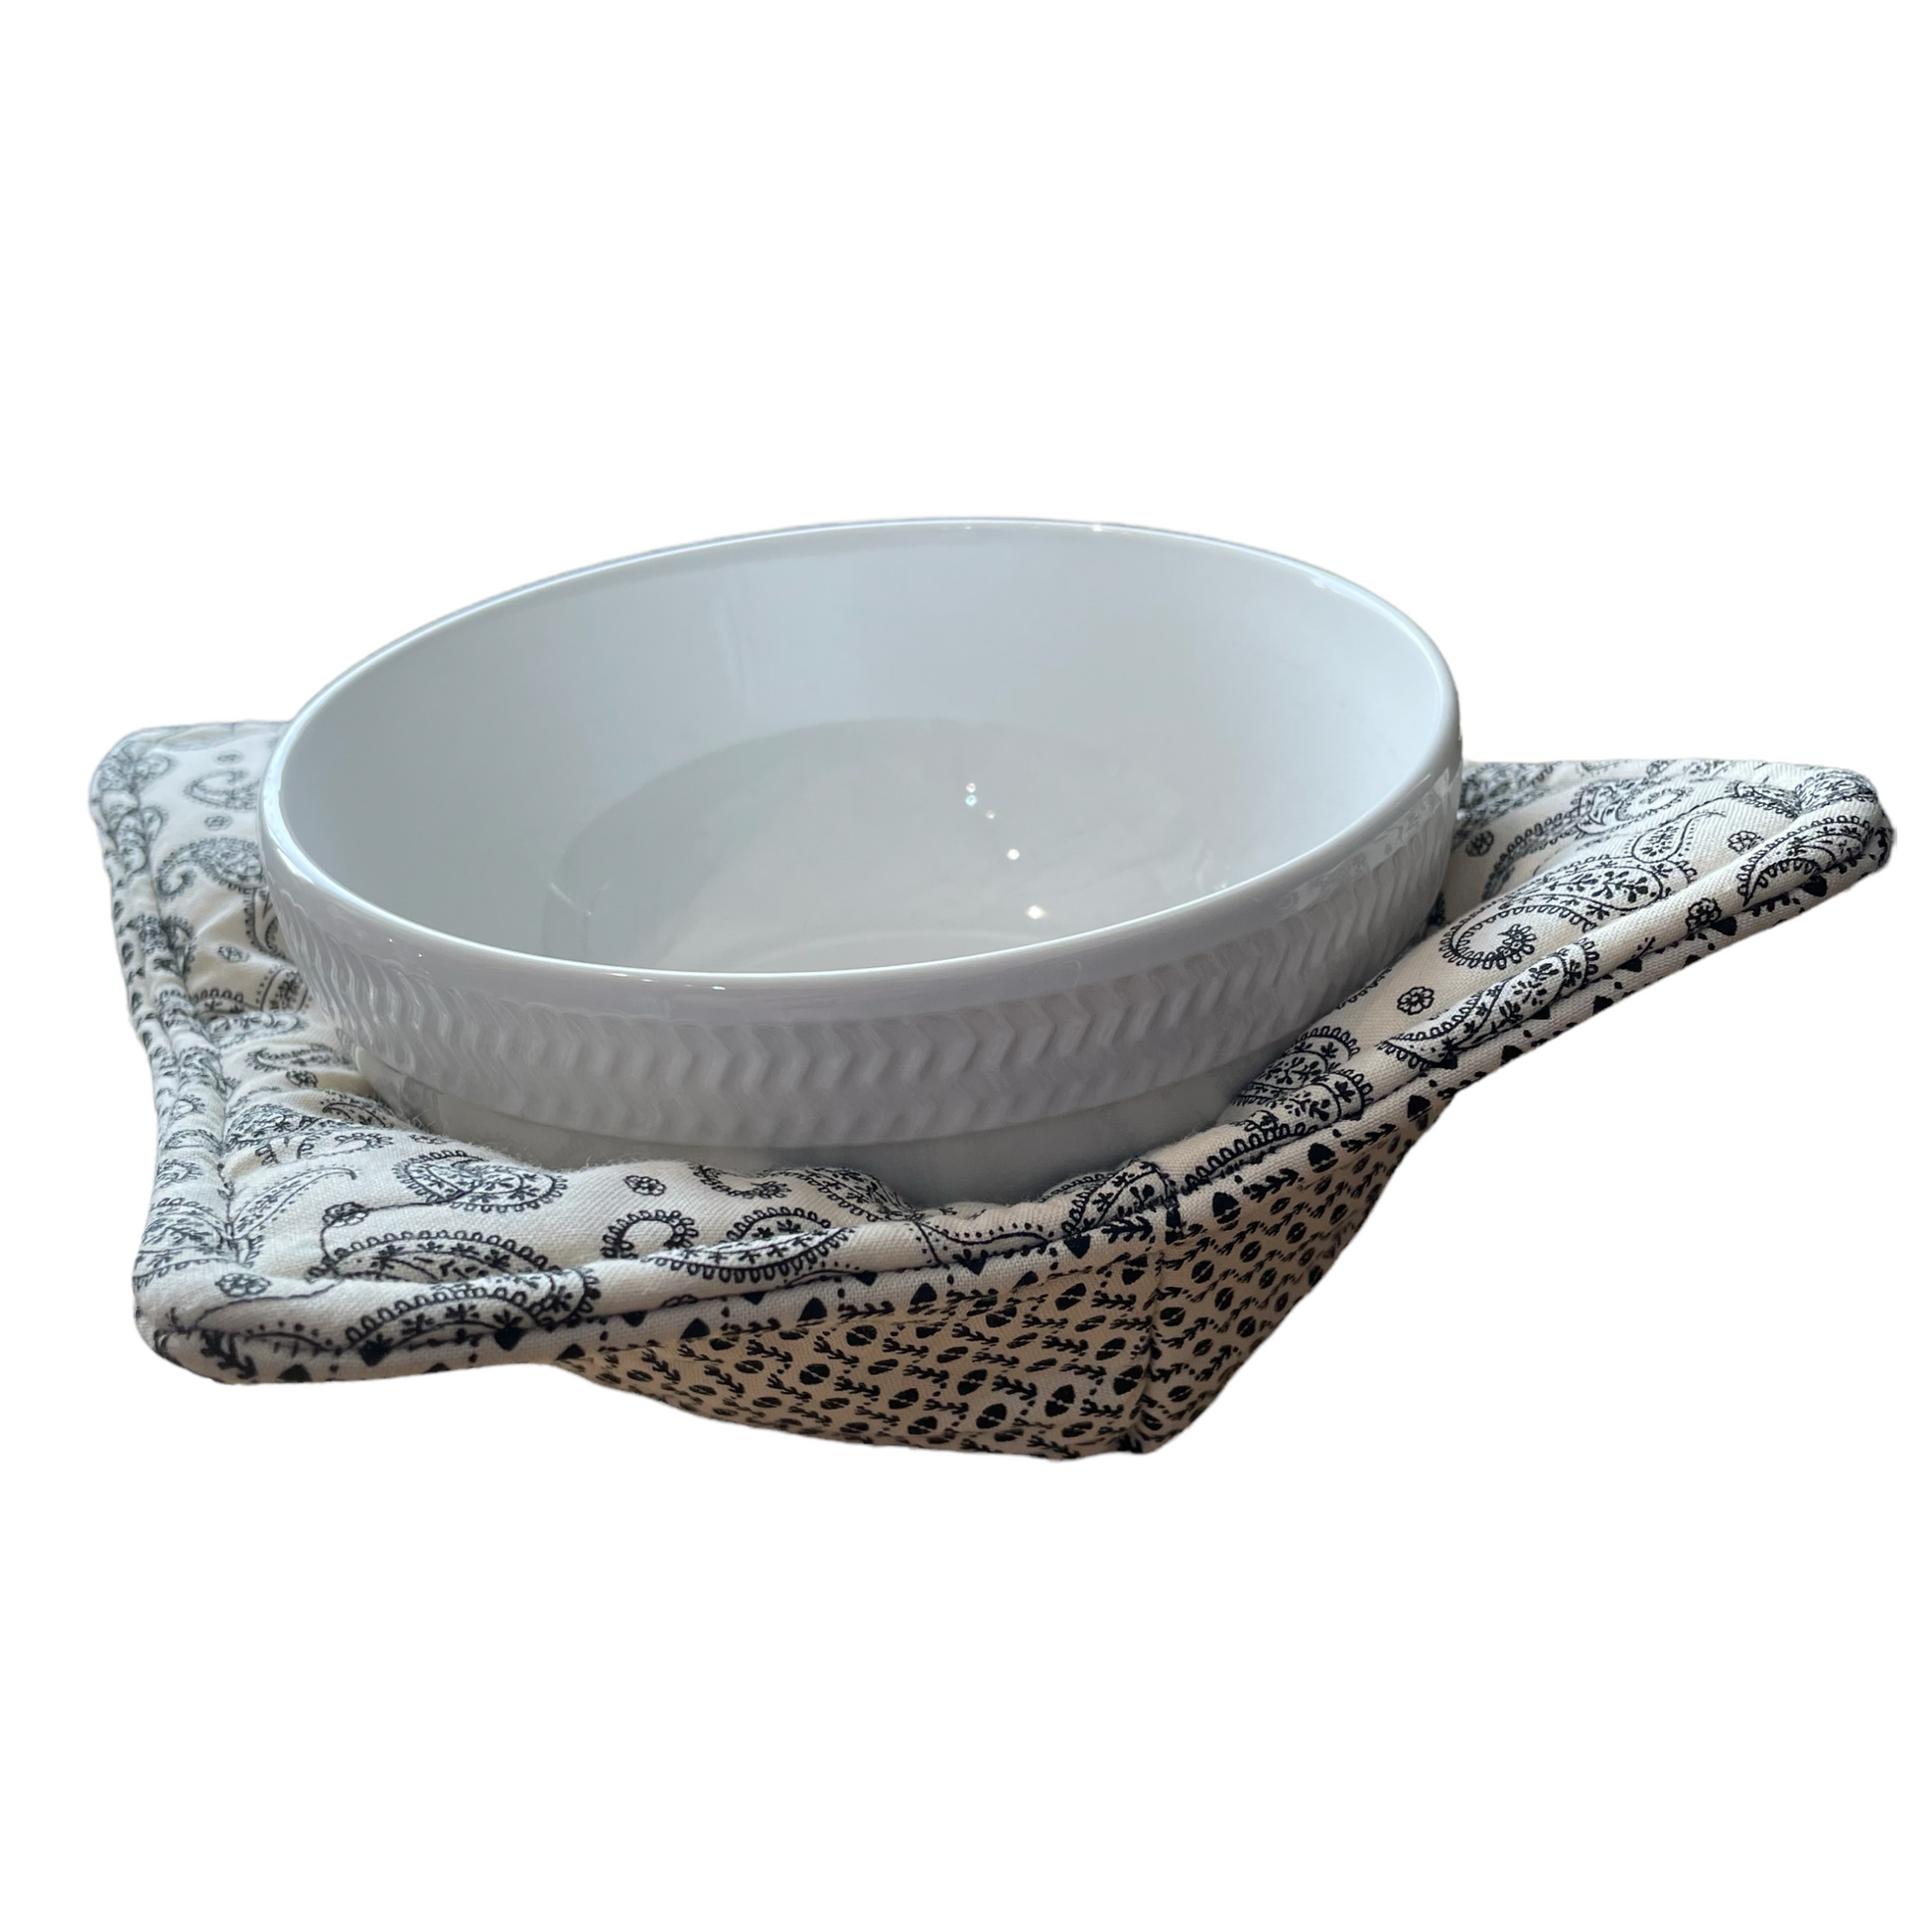 Soup bowl Cozy. Microwave Bowl Cozy. Reversible soup bowl Cozy. Shop the mix and match collection of handcrafted farmhouse style linens. Or follow along on the Home Stitchery Decor YouTube Channel. 